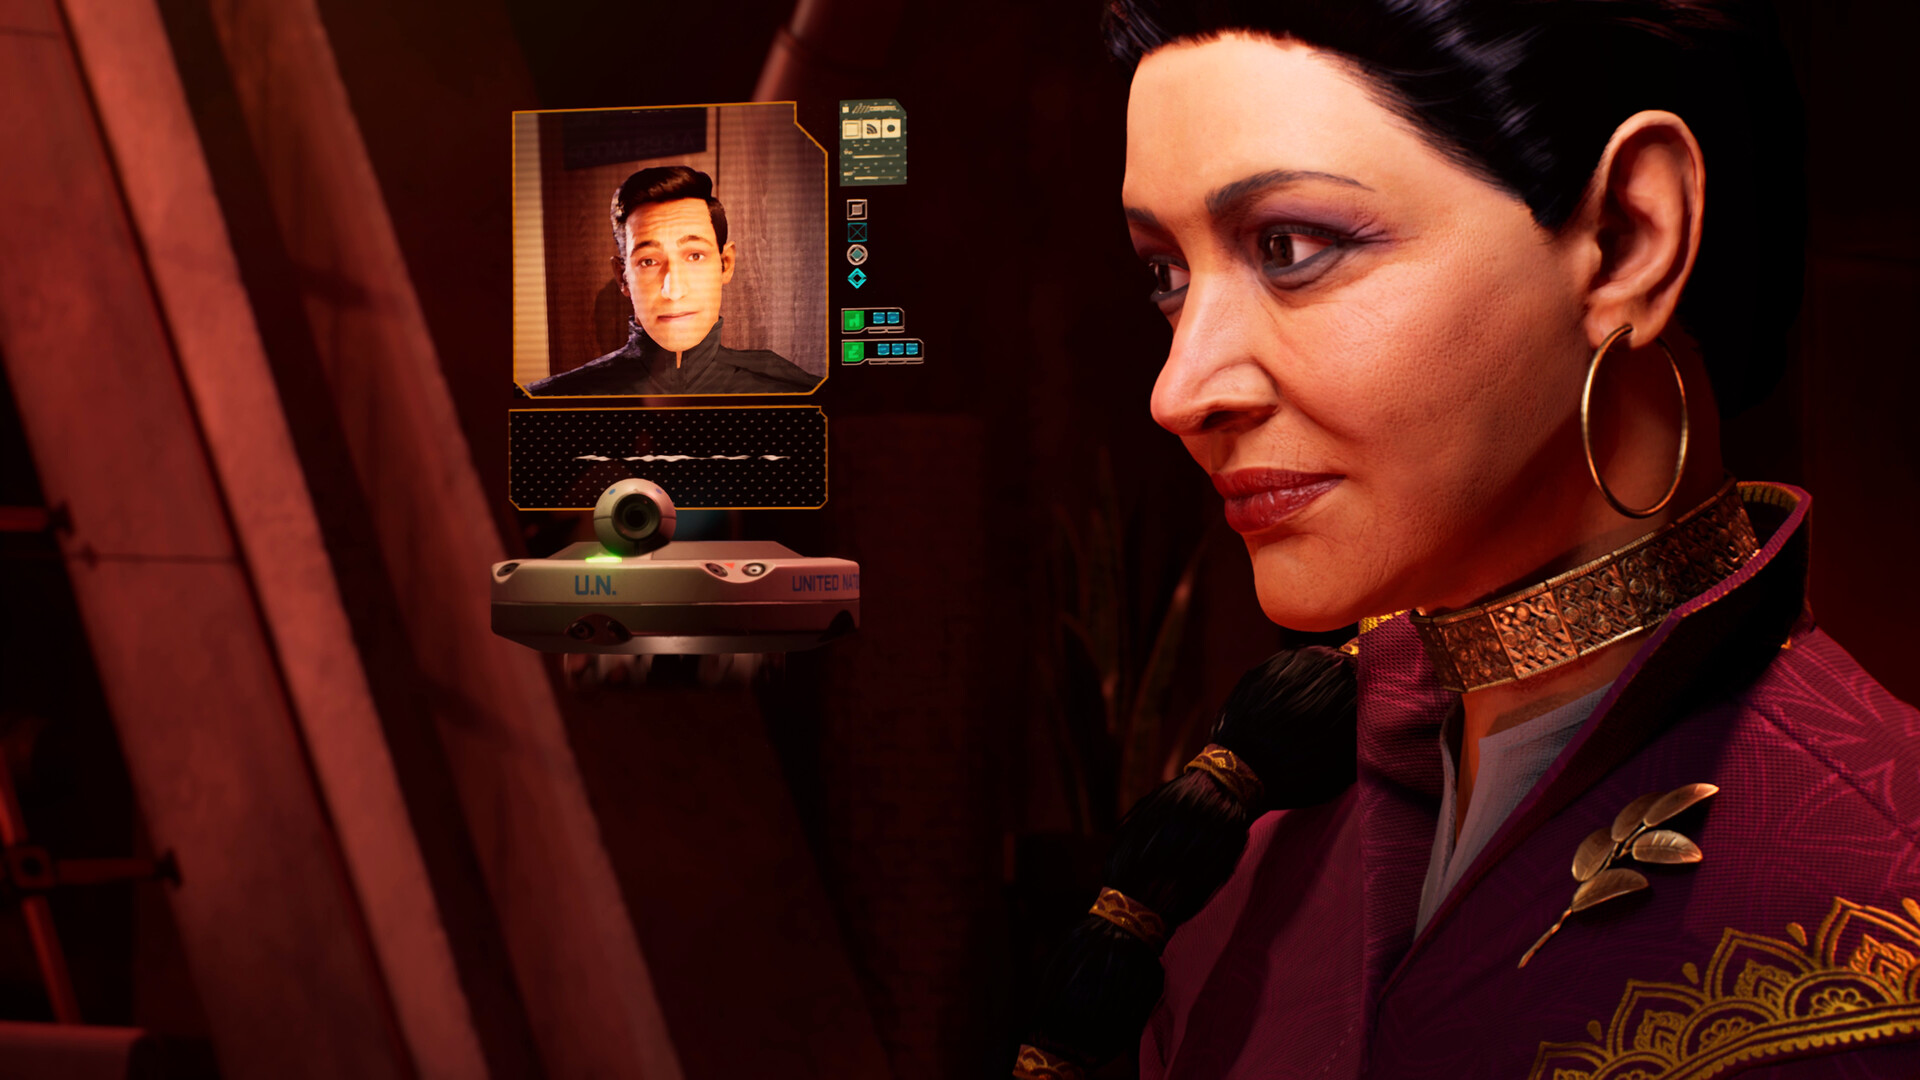 Is Telltale's The Expanse Coming to Steam? - Cultured Vultures